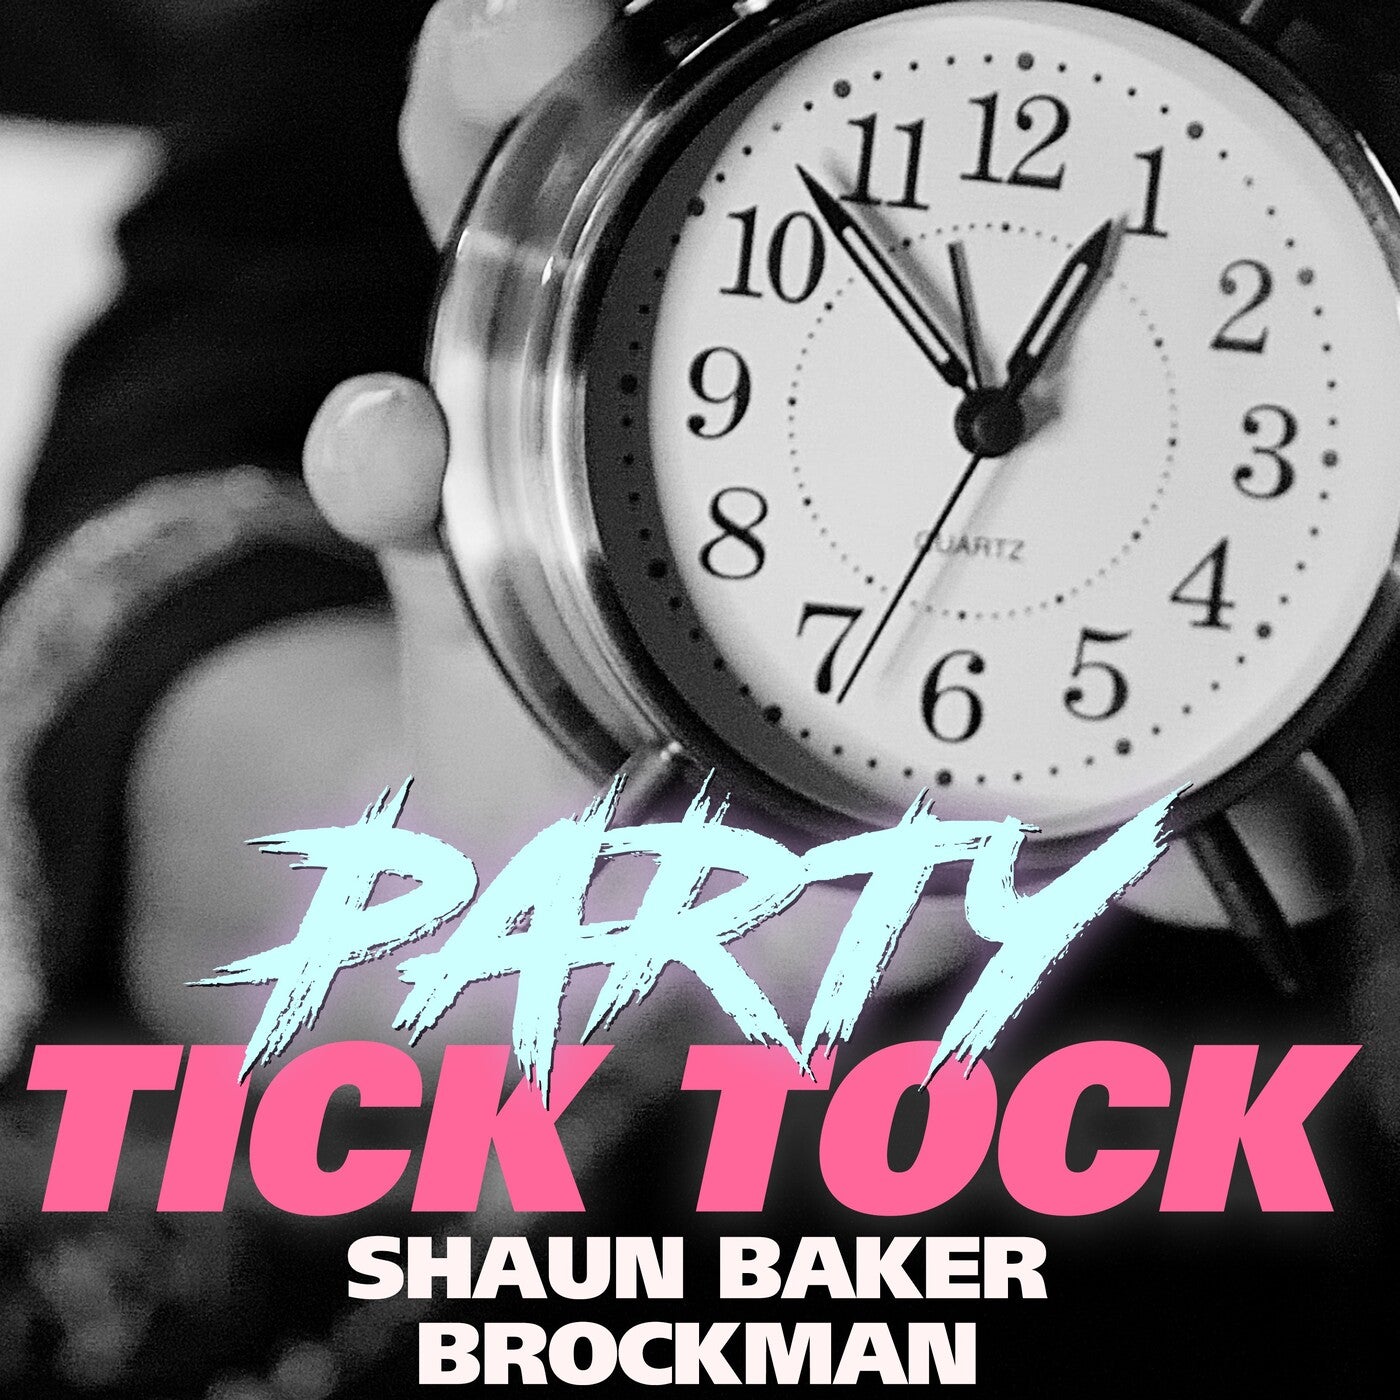 Party Tick Tock